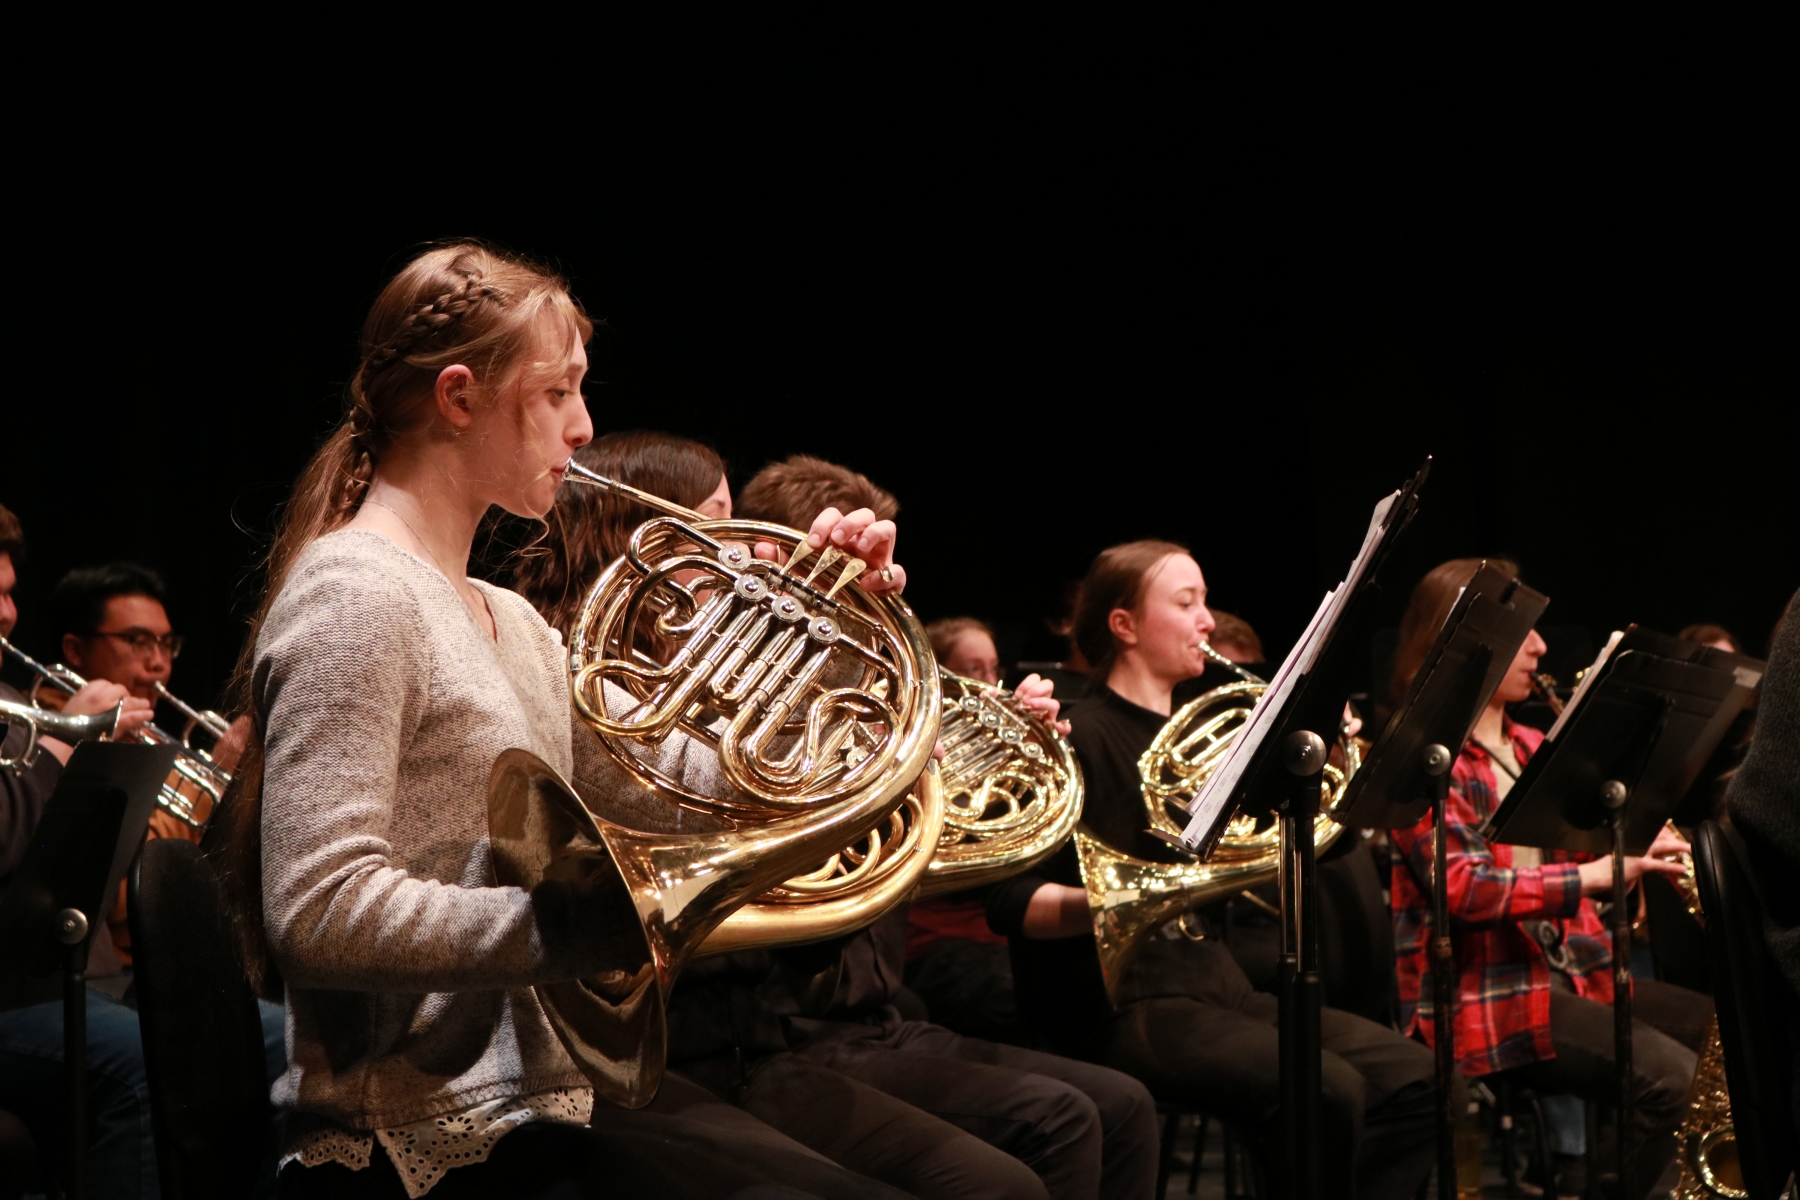 Students perform in the University of Manitoba Wind Ensemble and Concert Bands